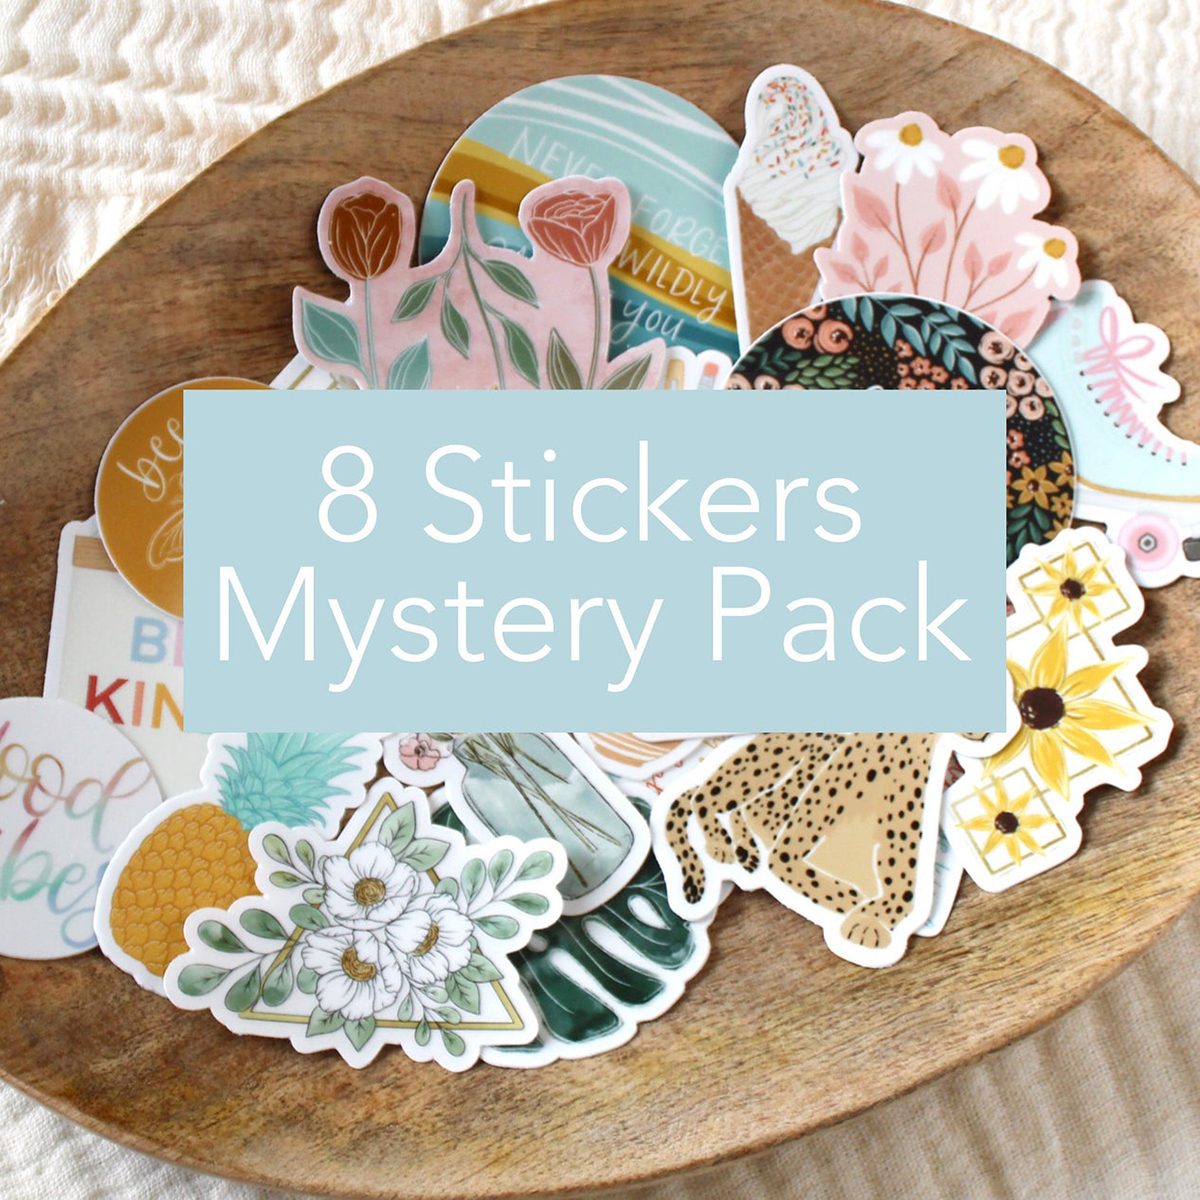 back to school gifts for students 8 Stickers Mystery Pack